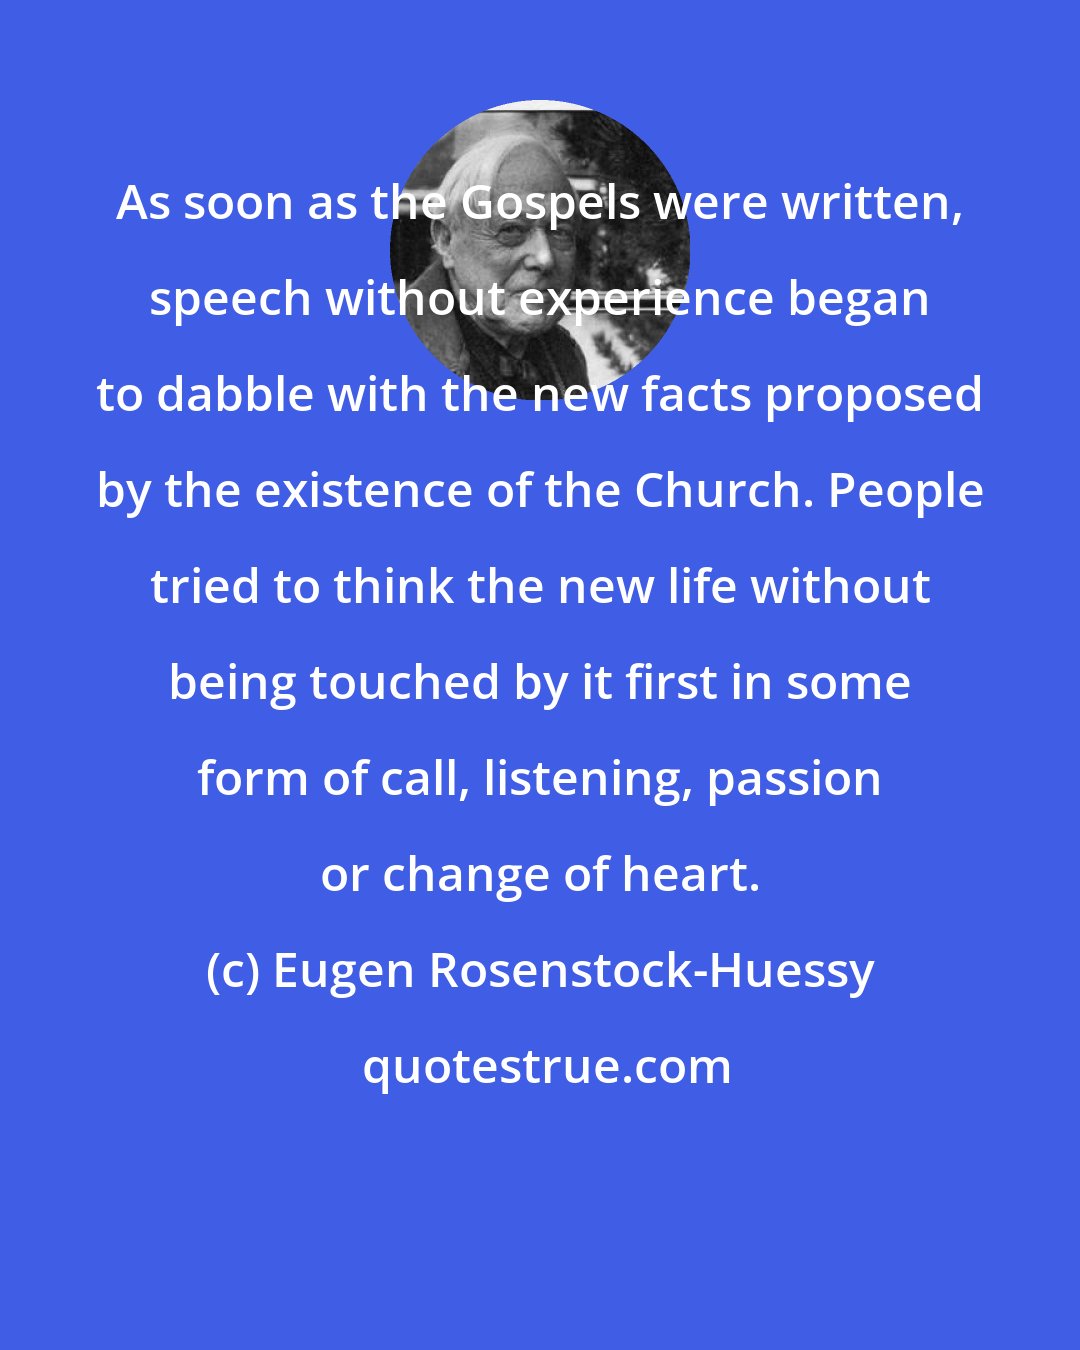 Eugen Rosenstock-Huessy: As soon as the Gospels were written, speech without experience began to dabble with the new facts proposed by the existence of the Church. People tried to think the new life without being touched by it first in some form of call, listening, passion or change of heart.